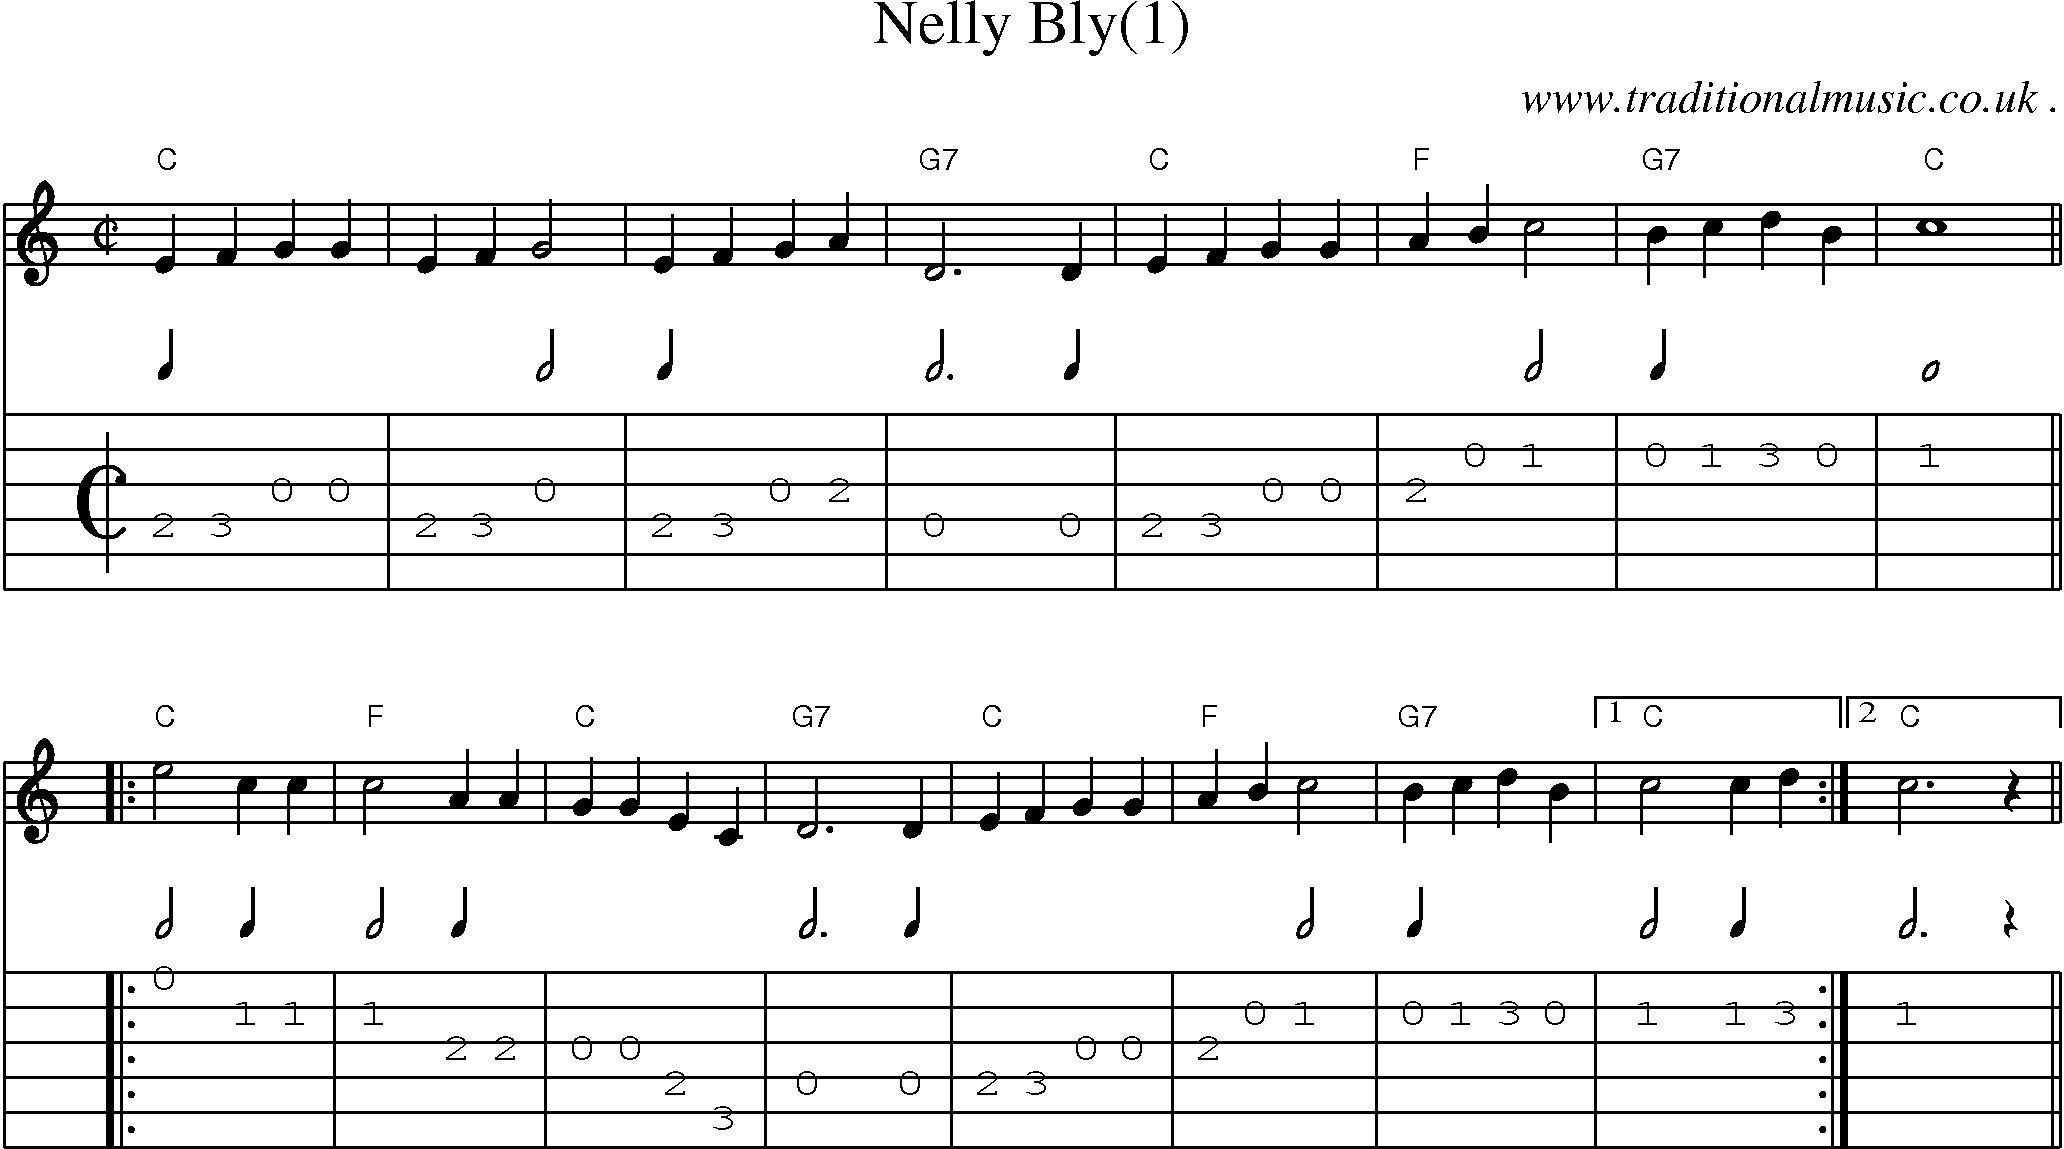 Music Score and Guitar Tabs for Nelly Bly(1)